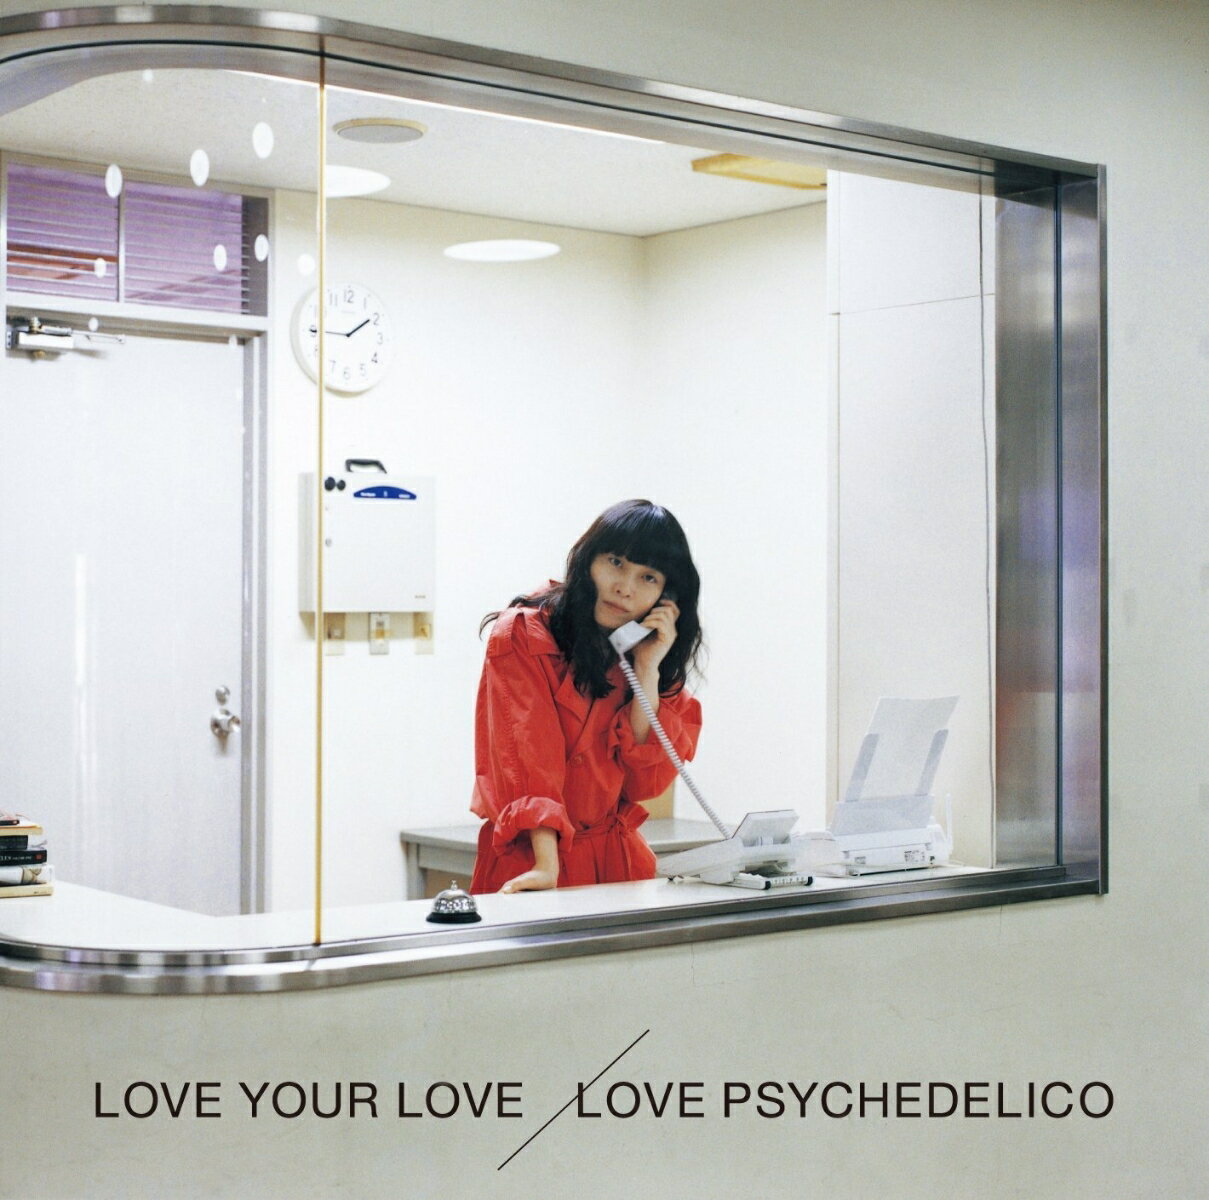 LOVE YOUR LOVE [ LOVE PSYCHEDELICO ]